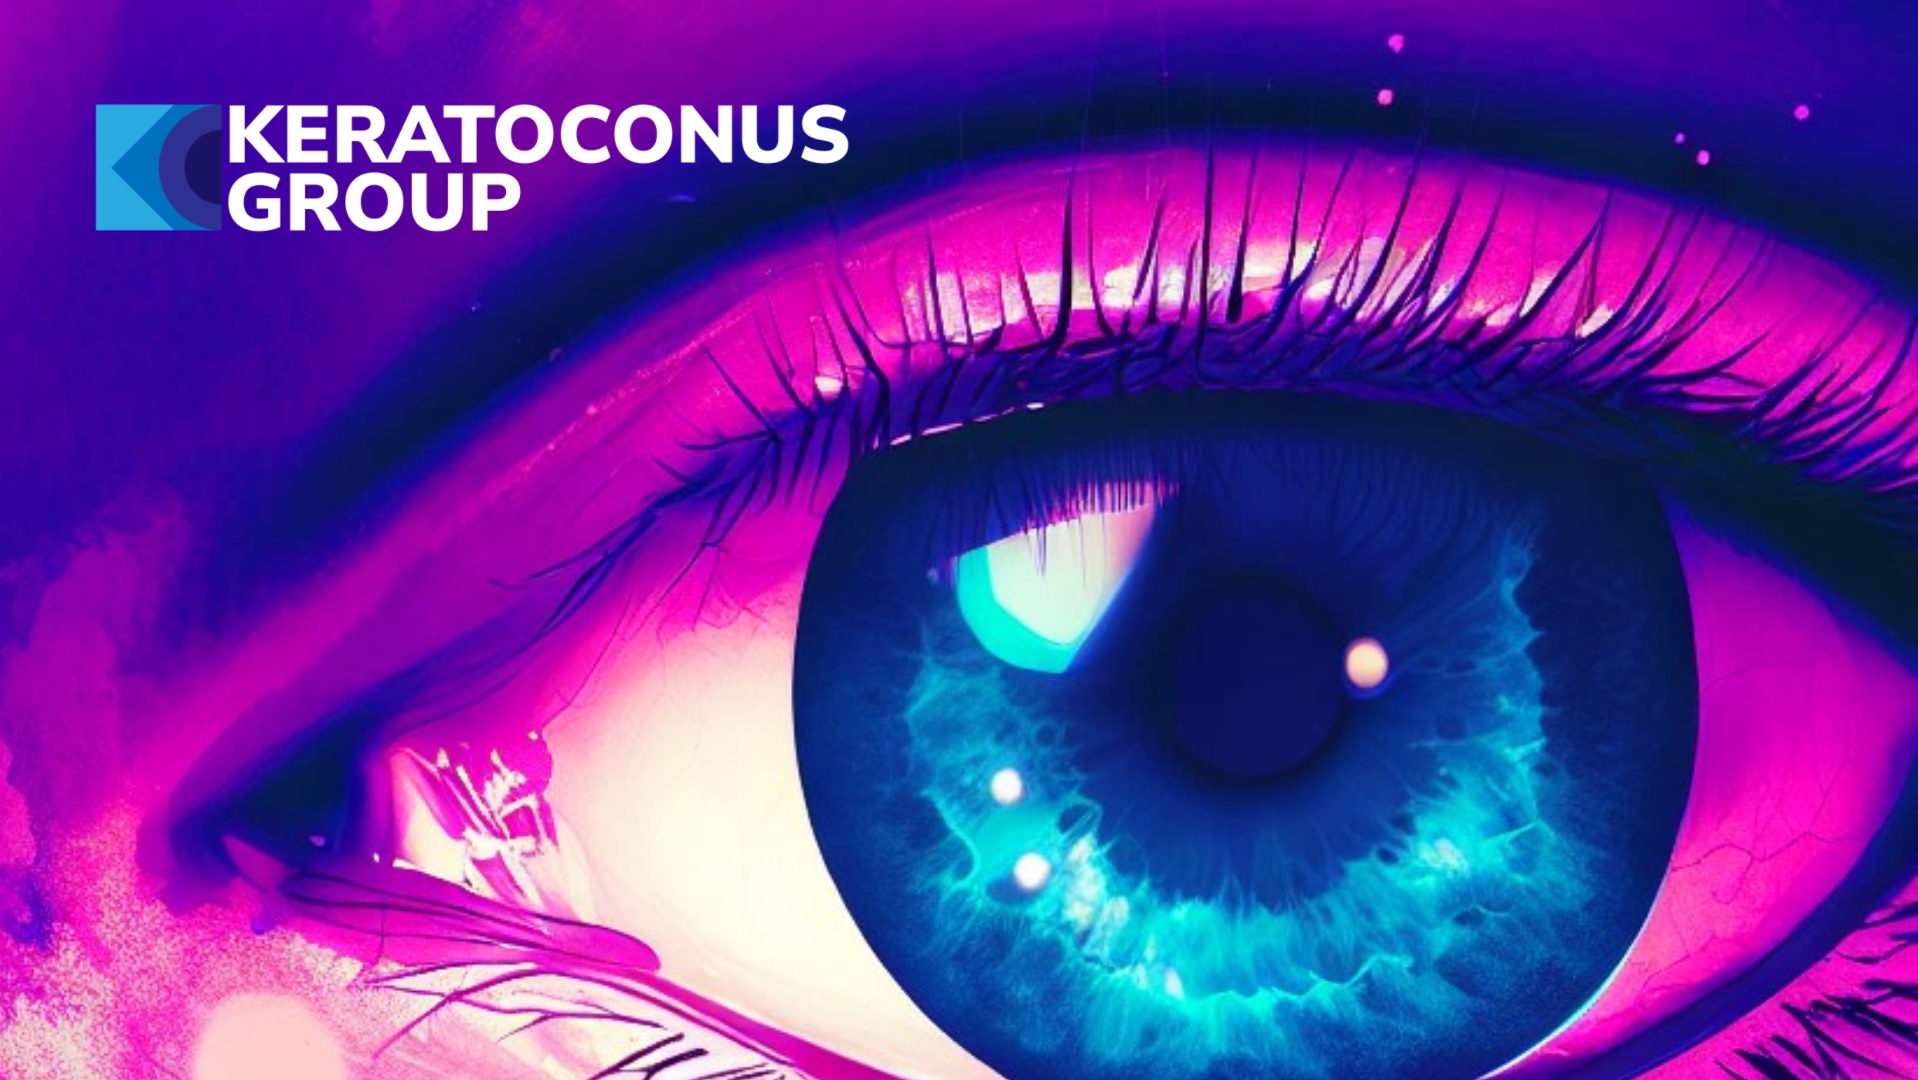 Keratoconus Group: A Place to Learn and Share about Keratoconus